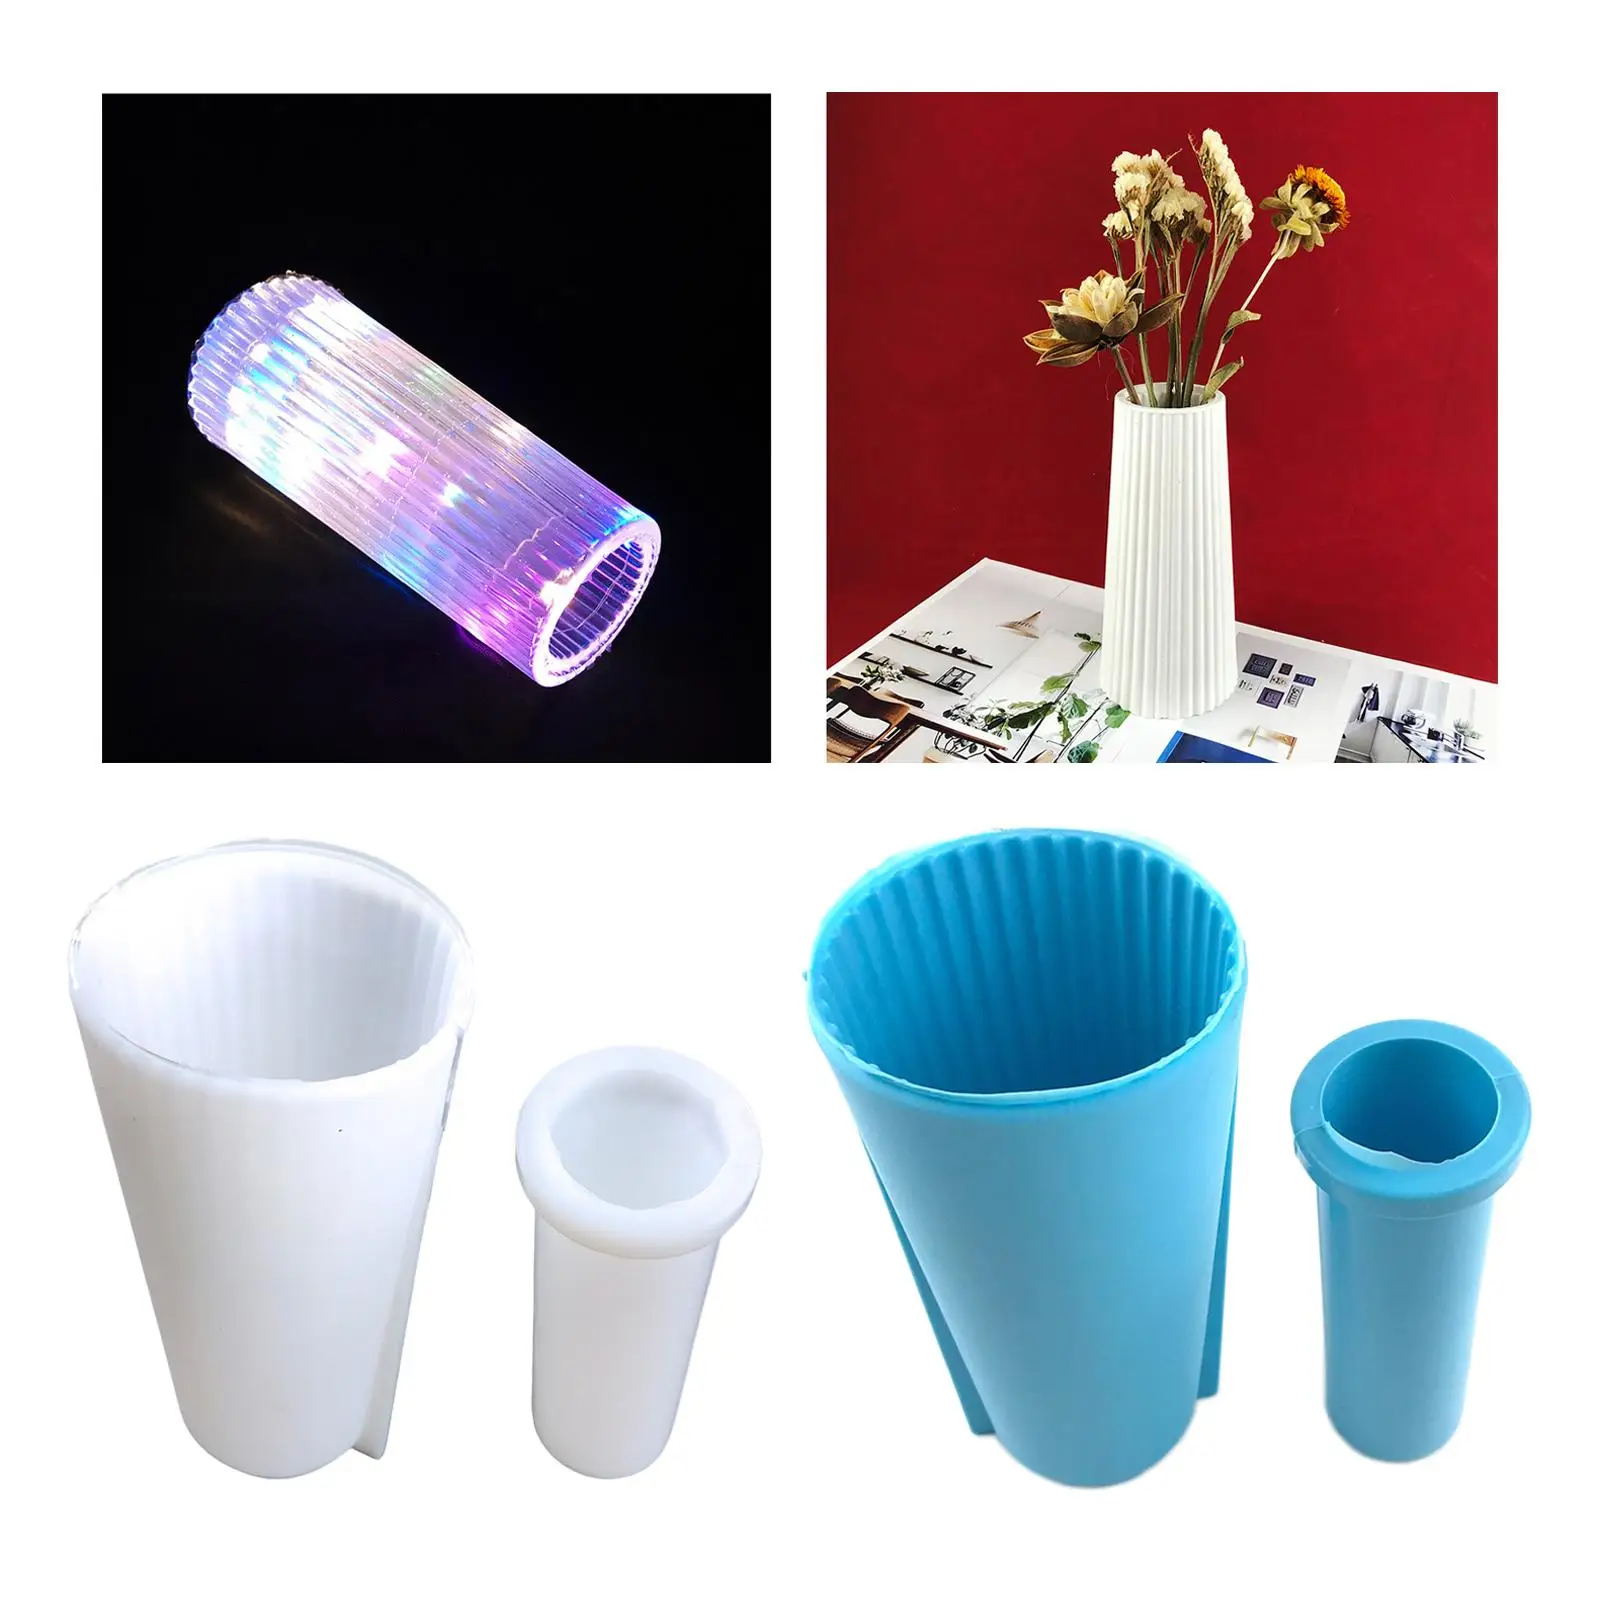 2Pcs Epoxy Resin Casting Vase Mold DIY Art Making Home Decoration Gardening Decor Planter Vases Silicone Molds for Supplies